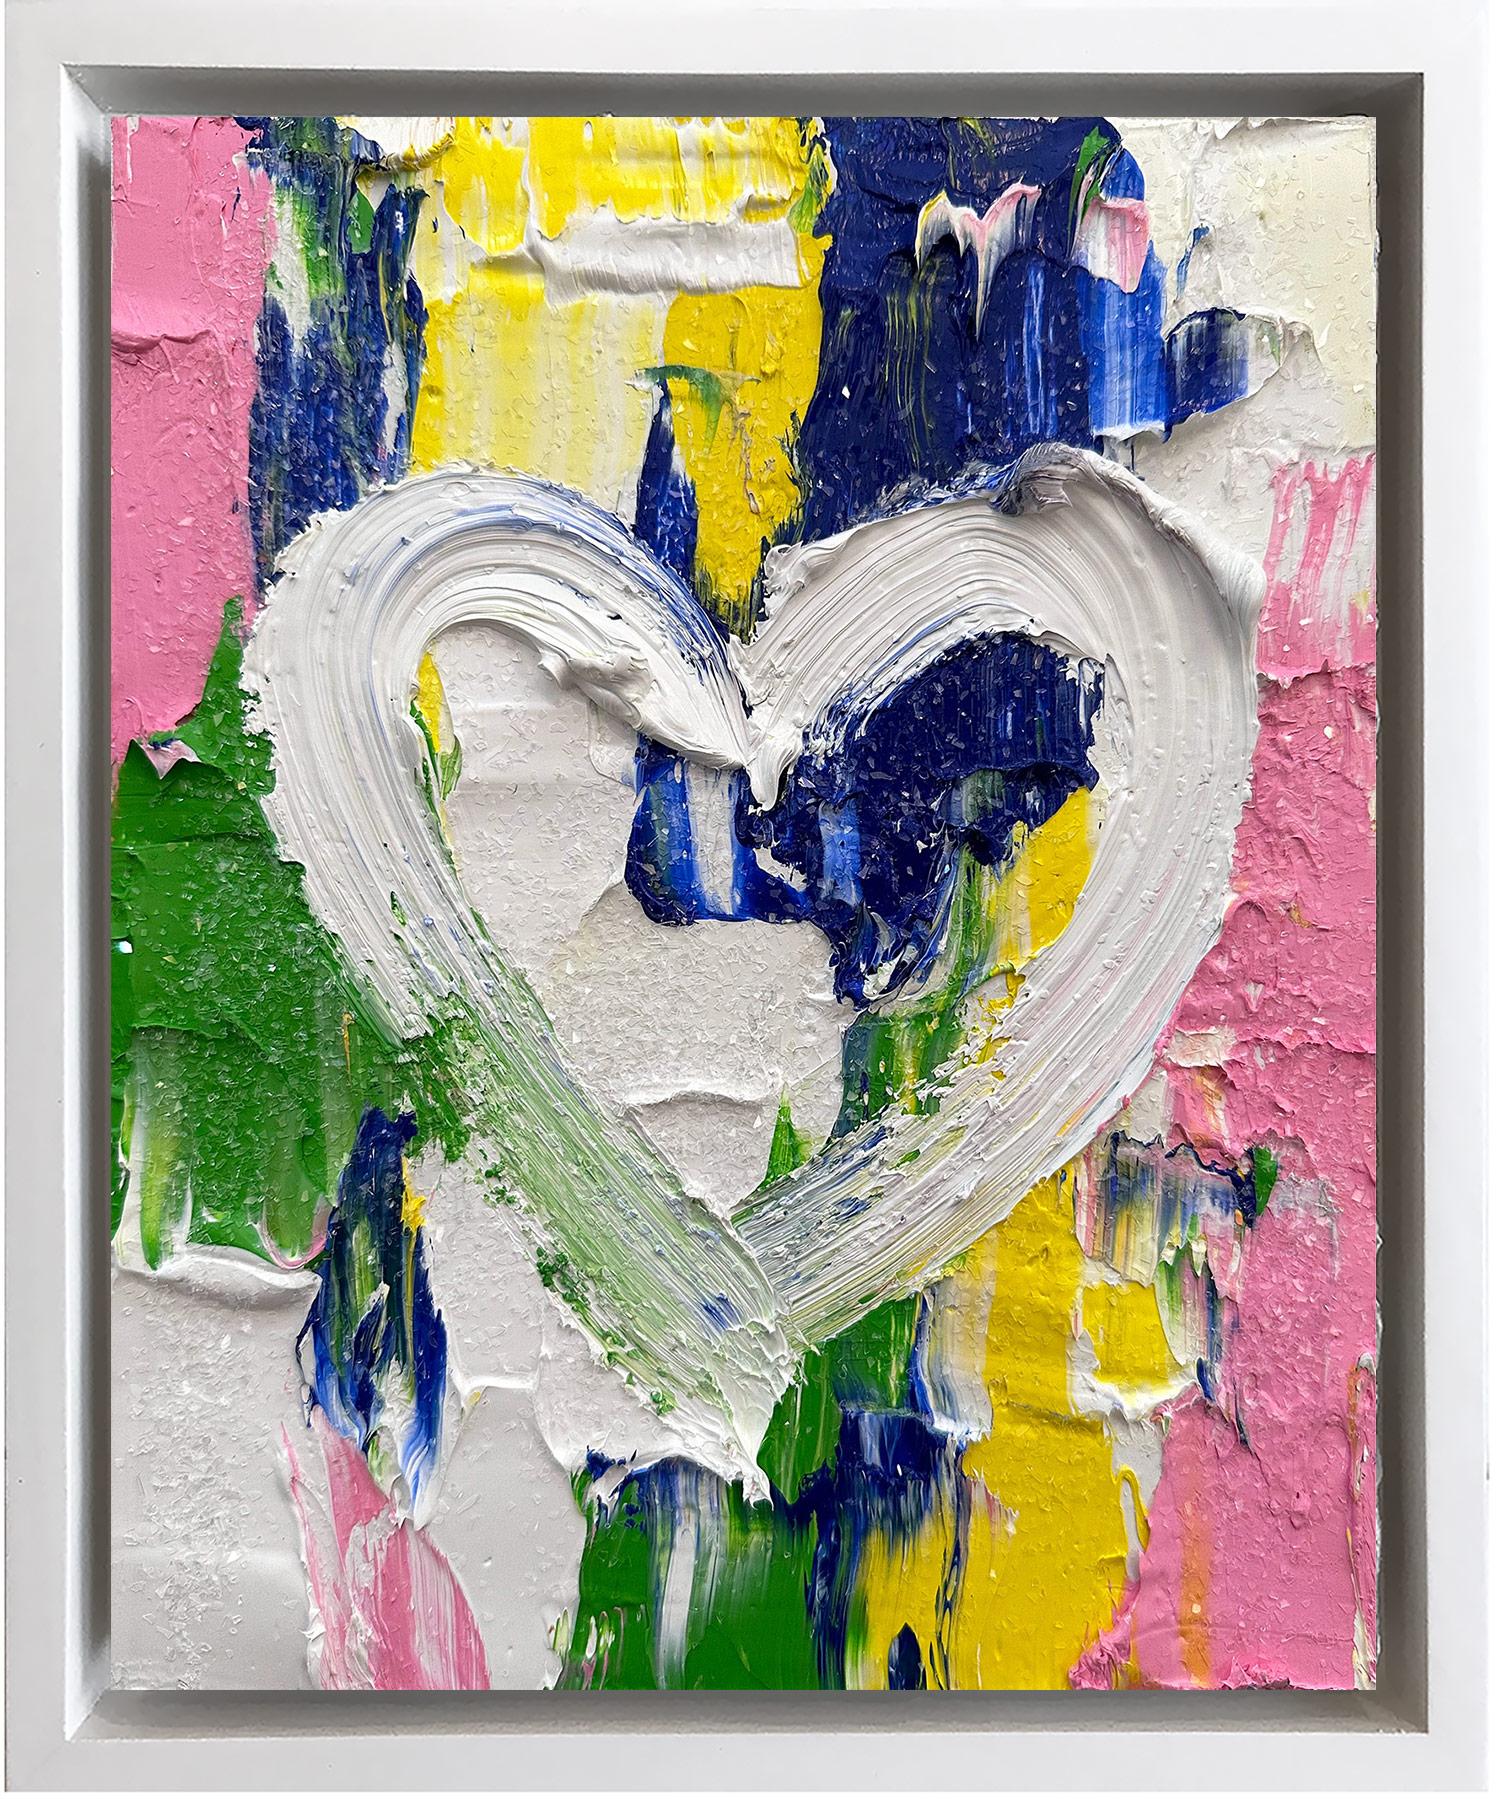 Cindy Shaoul Abstract Painting - "My Manolo Blahnik Heart" Contemporary Oil Painting on Wood White Floater Frame